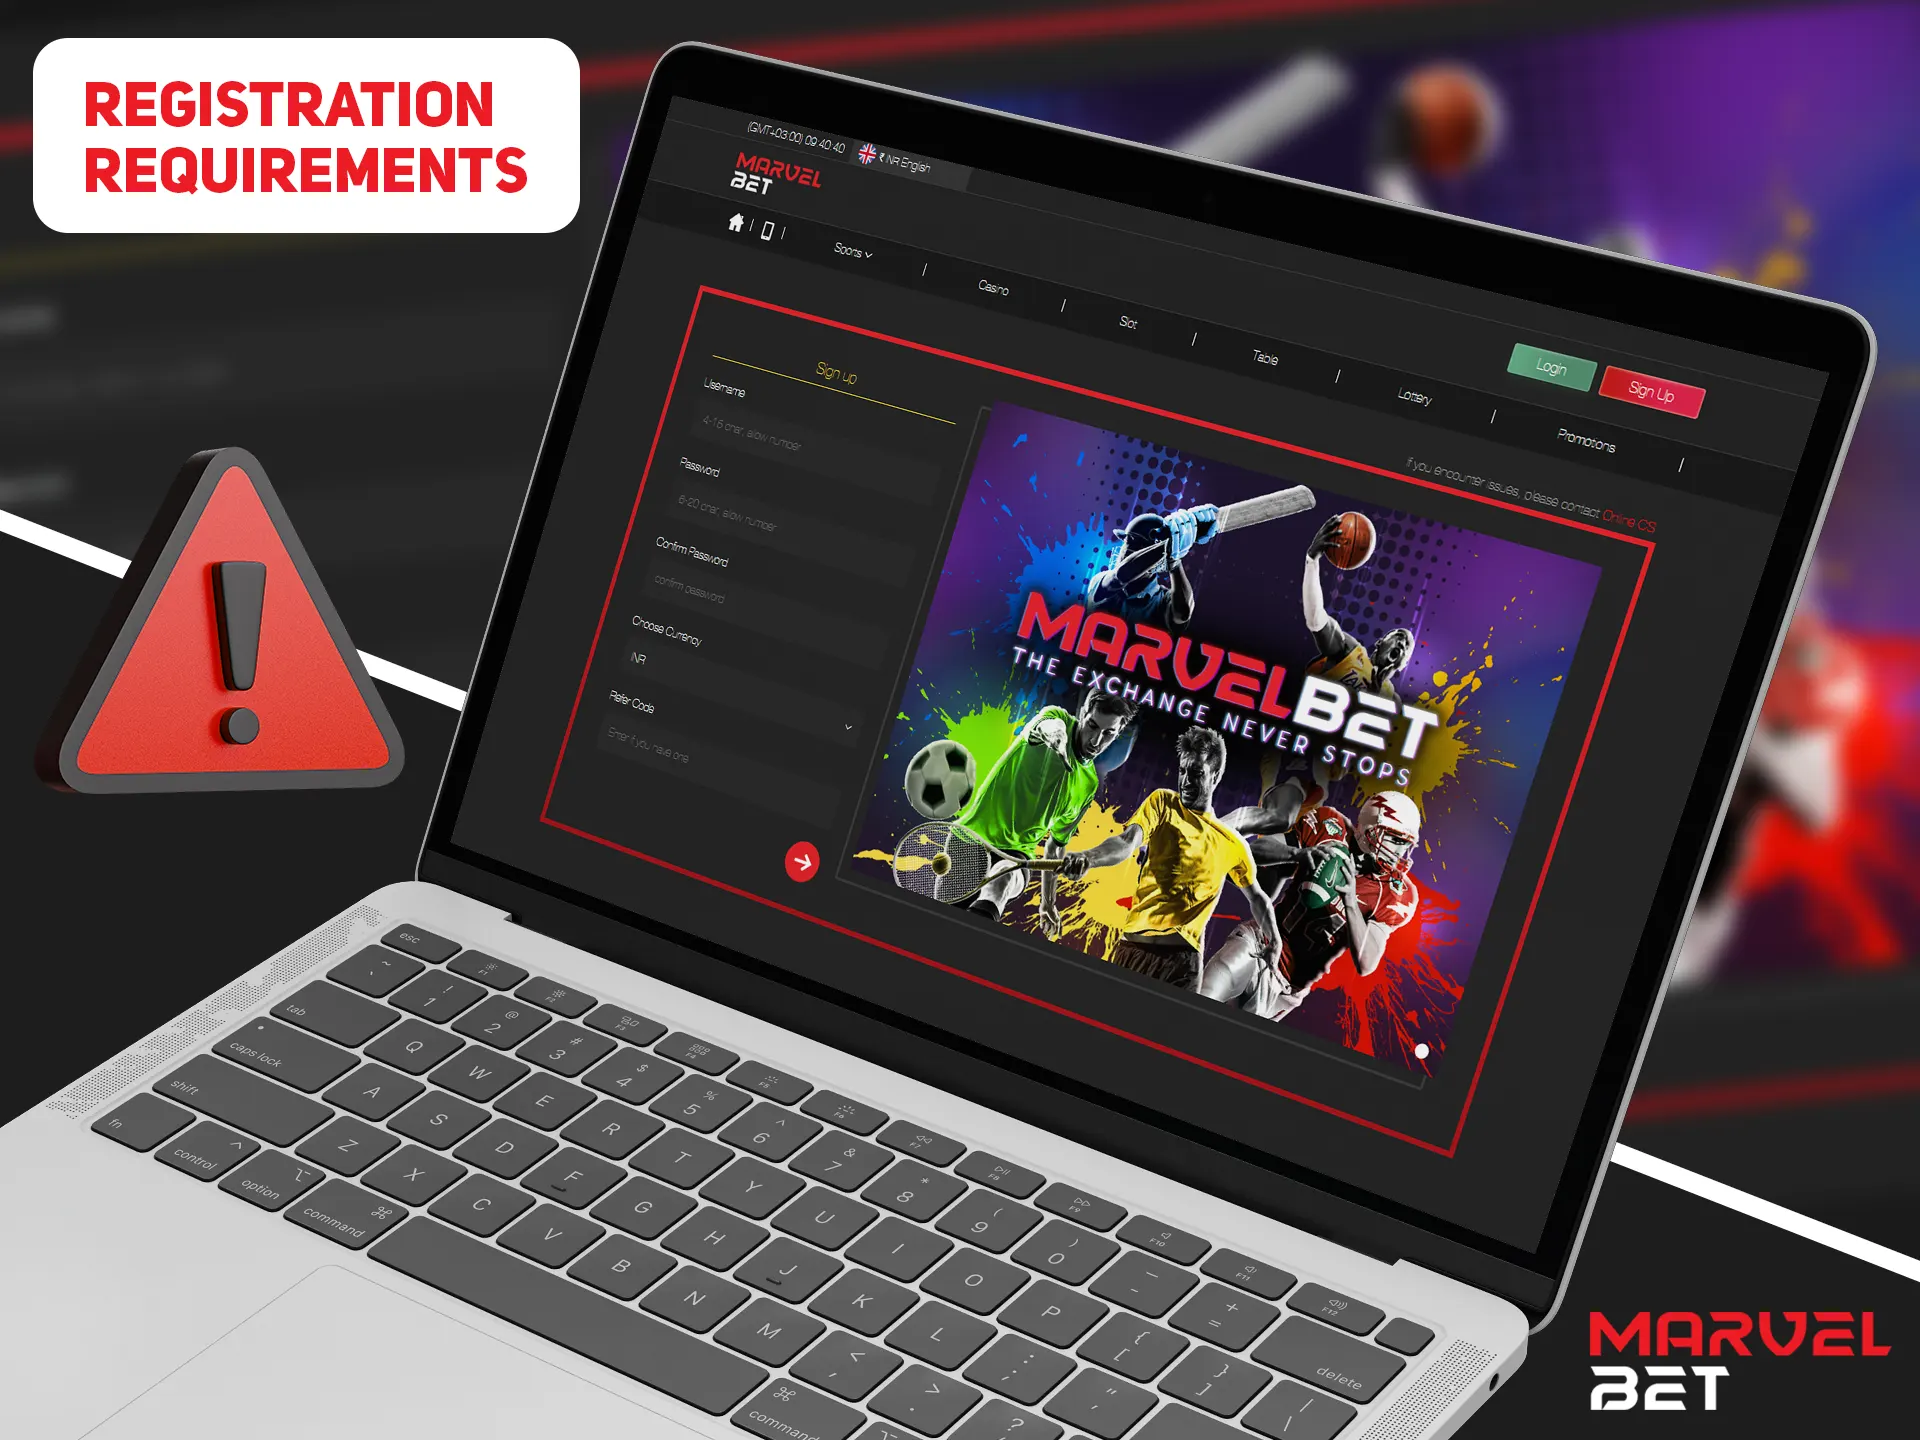 Follow all of the Marvelbet registration requirements.